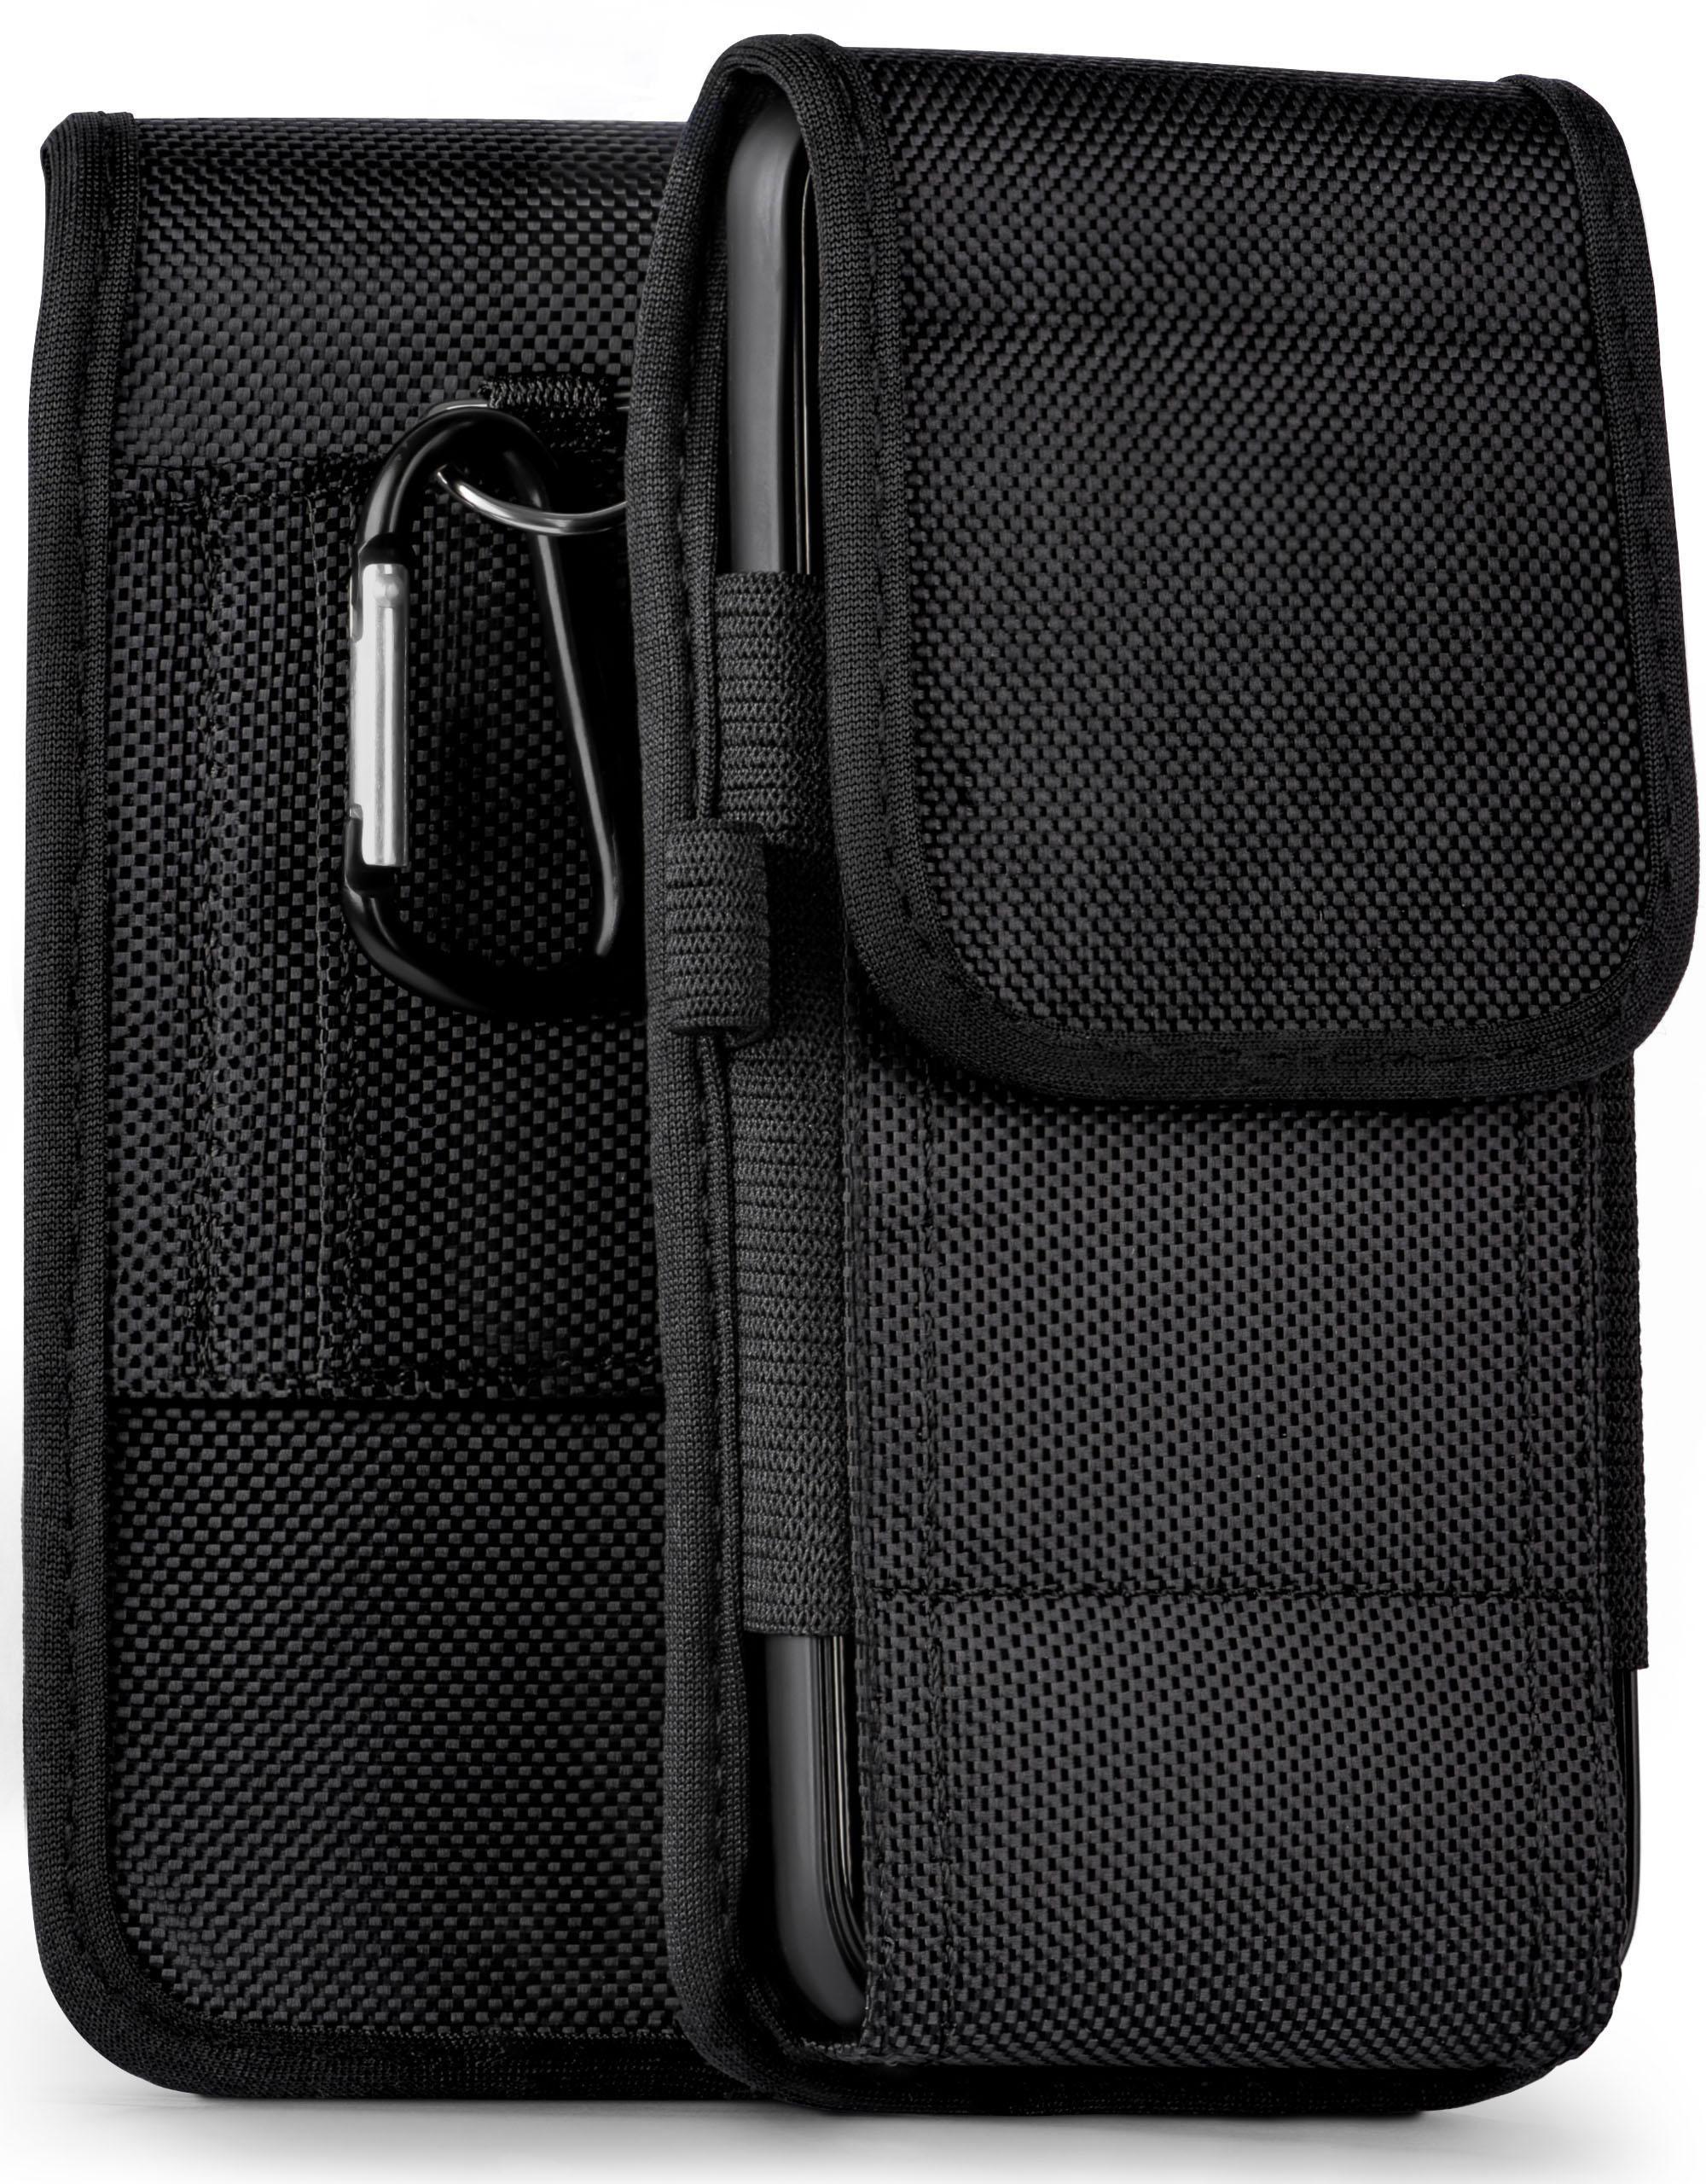 3T, Agility MOEX Trail OnePlus, Case, Holster,